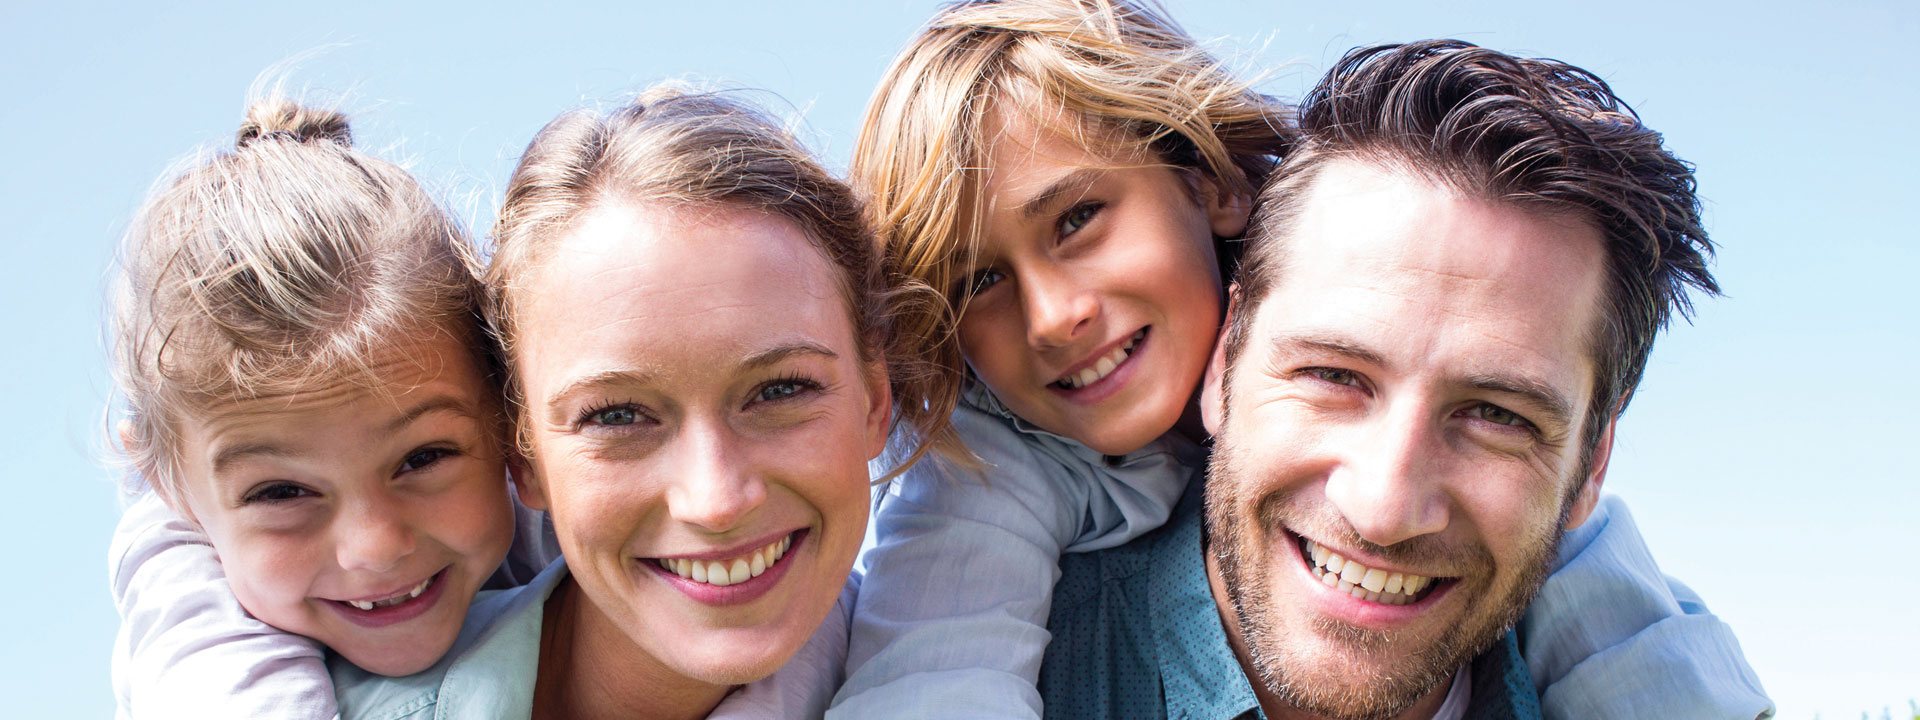 Family dentistry in Derry, NH patients at Vanguard Dental Group